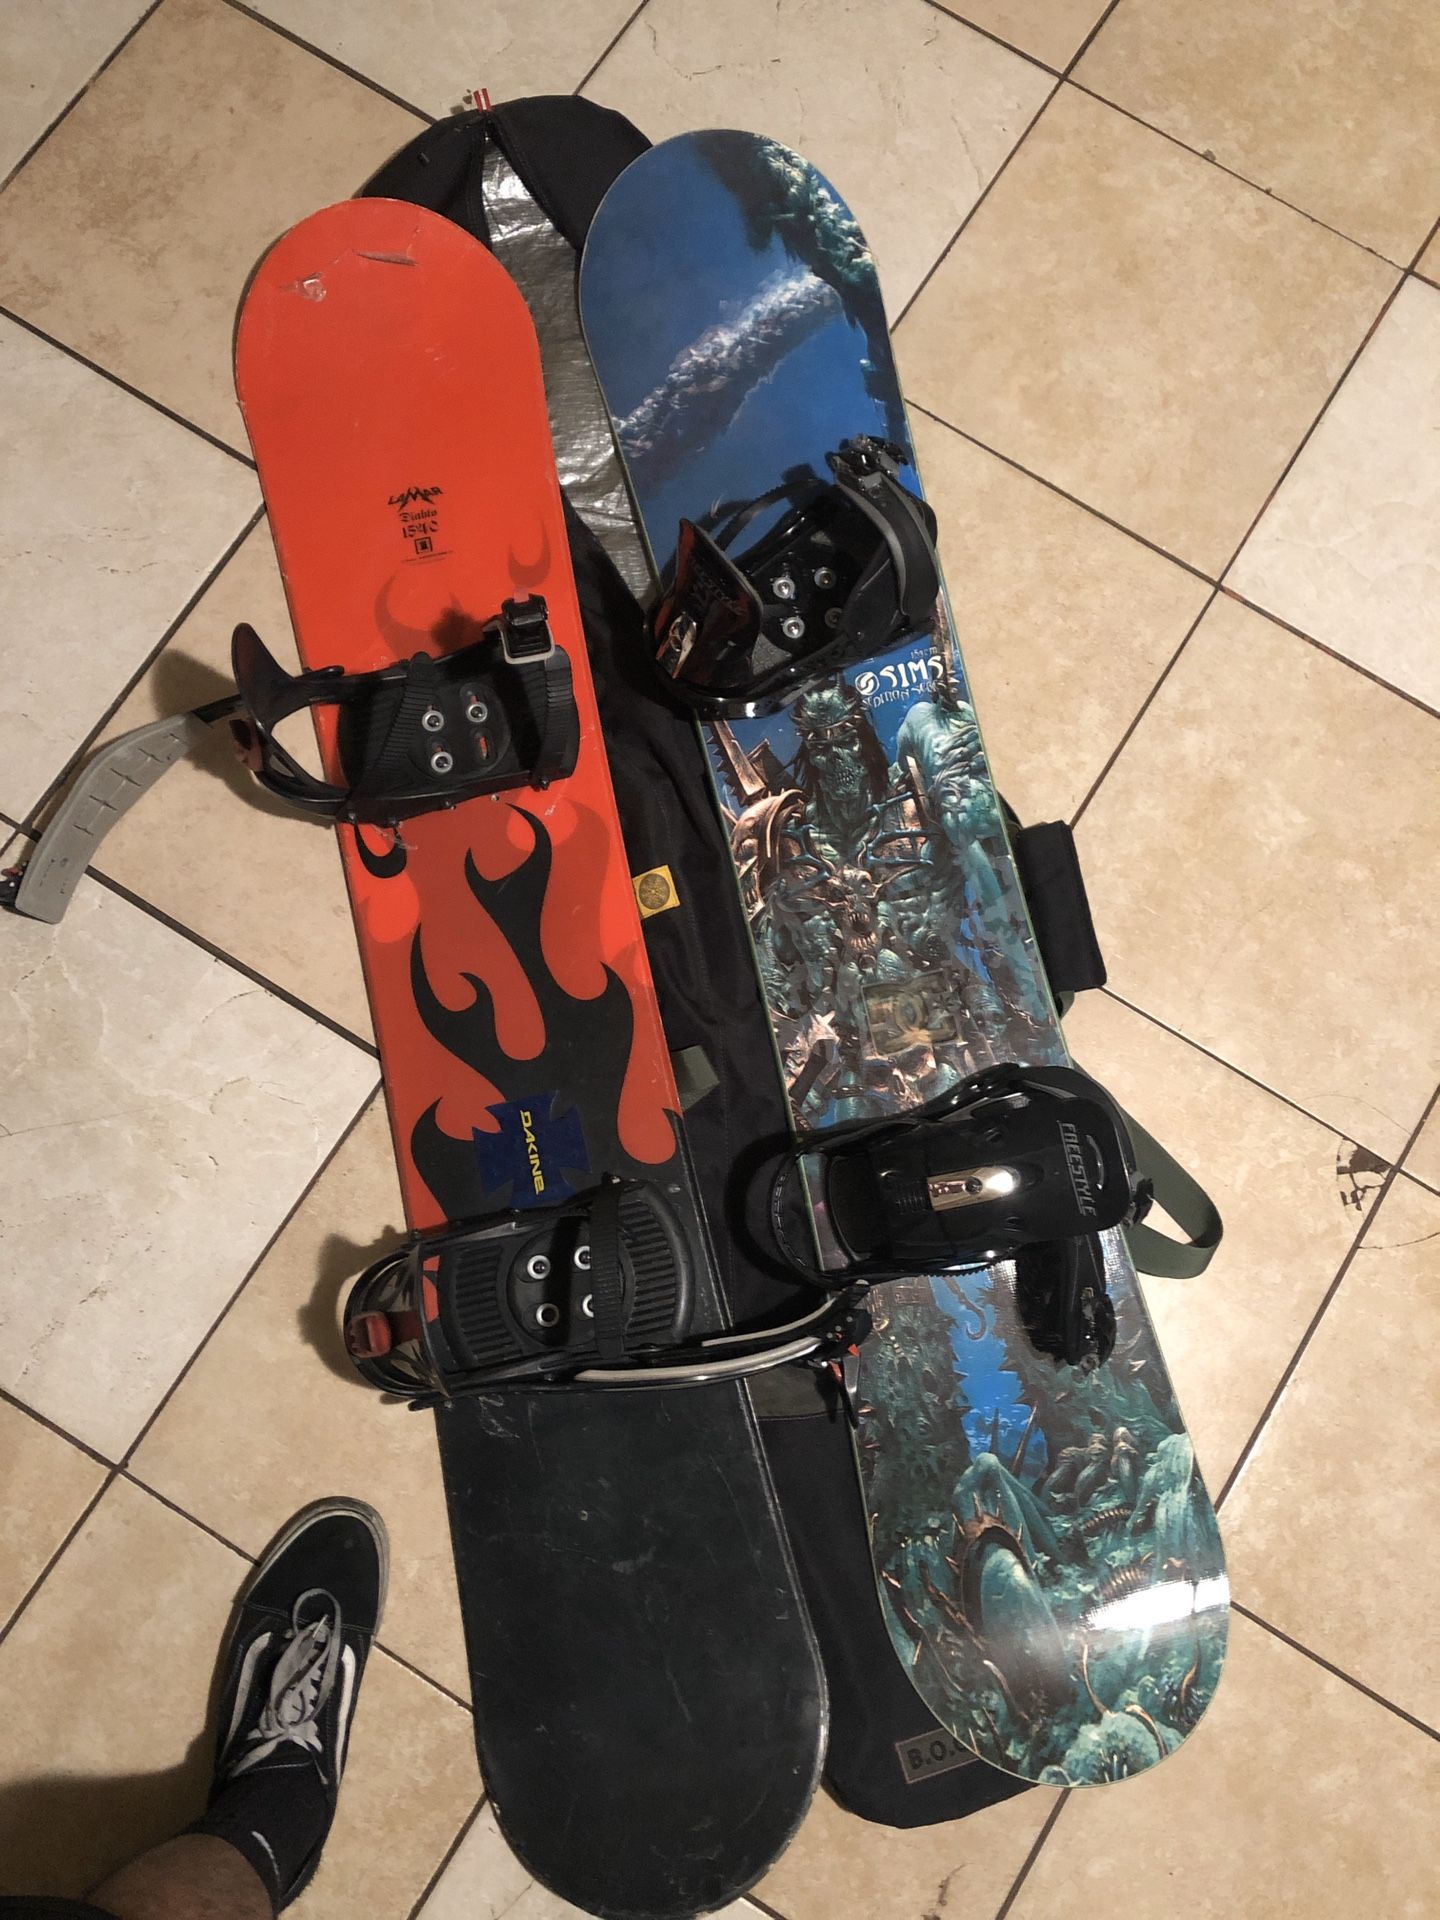 154 snowboard with bindings for sale/ or trade